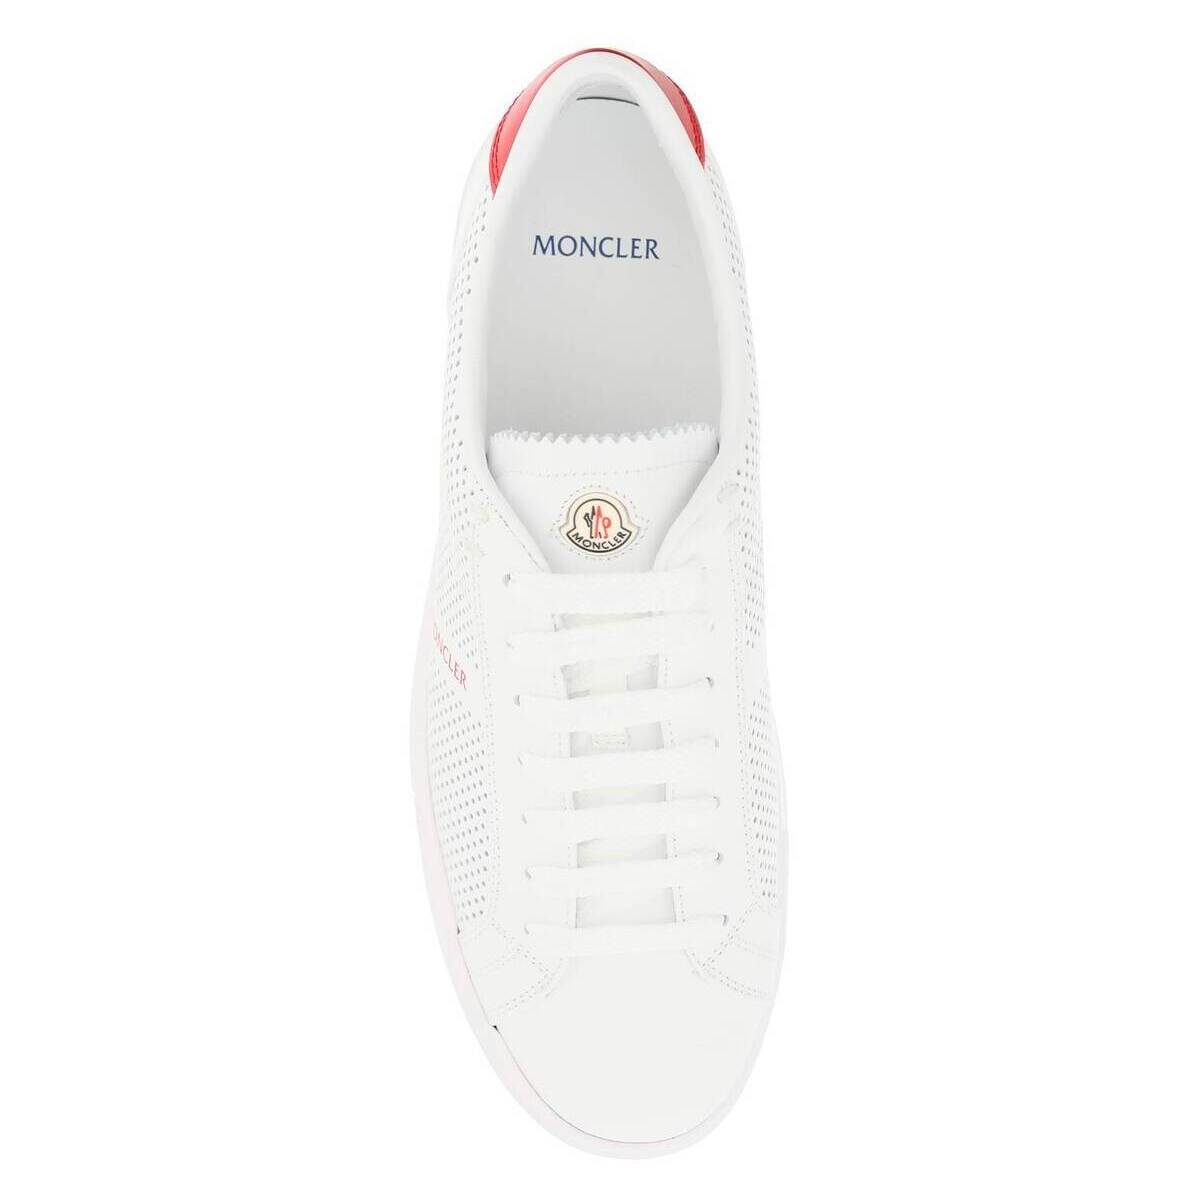 Moncler モンクレール lsnx Bianco メンズ Moncler Basic New Monaco Sneakers Perforated 4m003 最大59 Offクーポン 02ssc 06 Ik スニーカー 春夏22 Leather